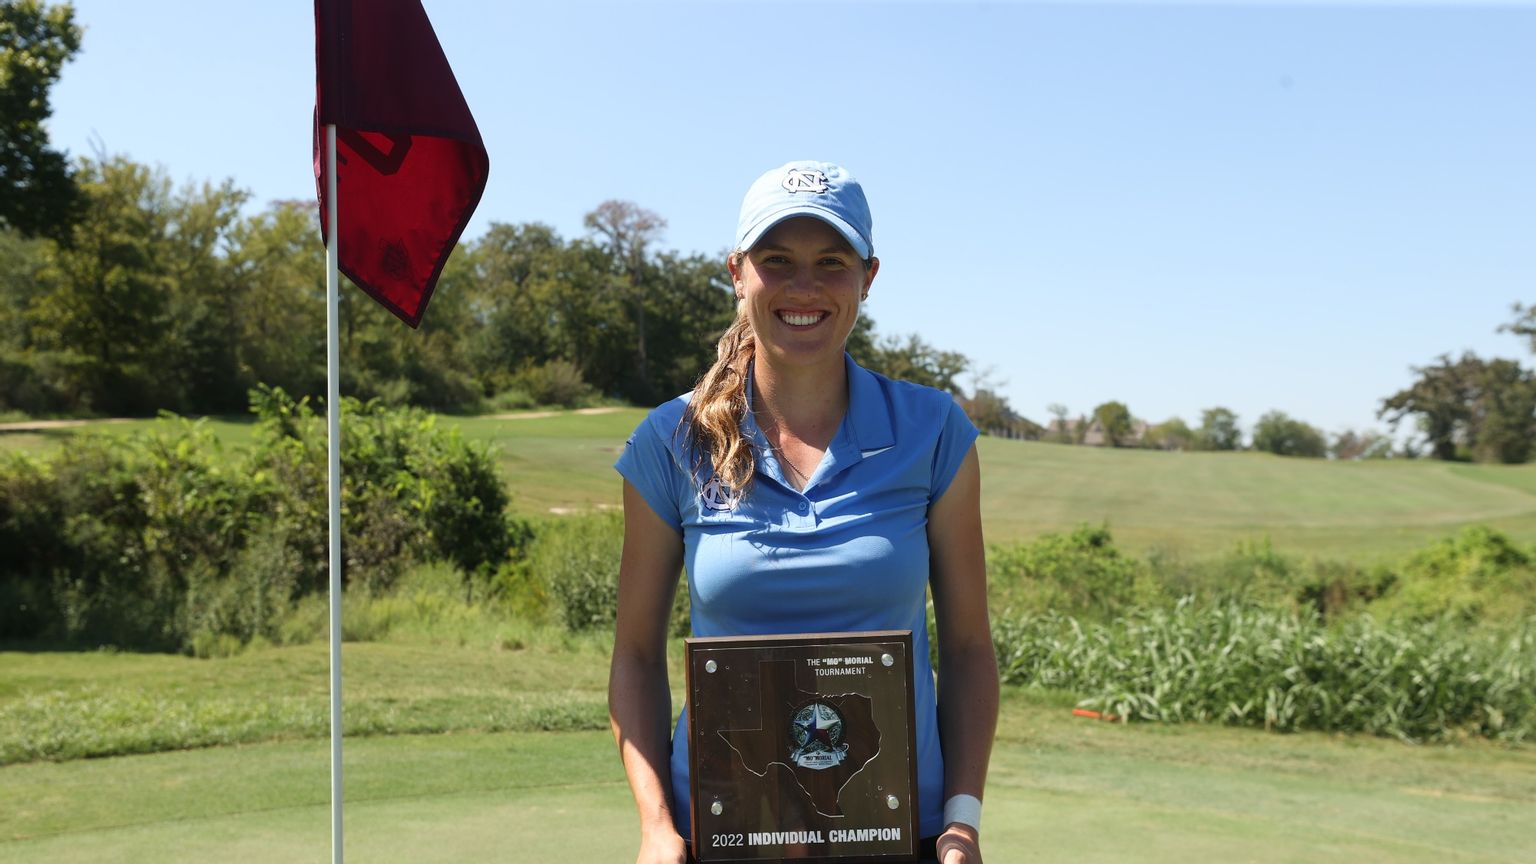 Kayla Smith Wins Individual Title, UNC Women’s Golf Finishes 3rd in Texas Tournament